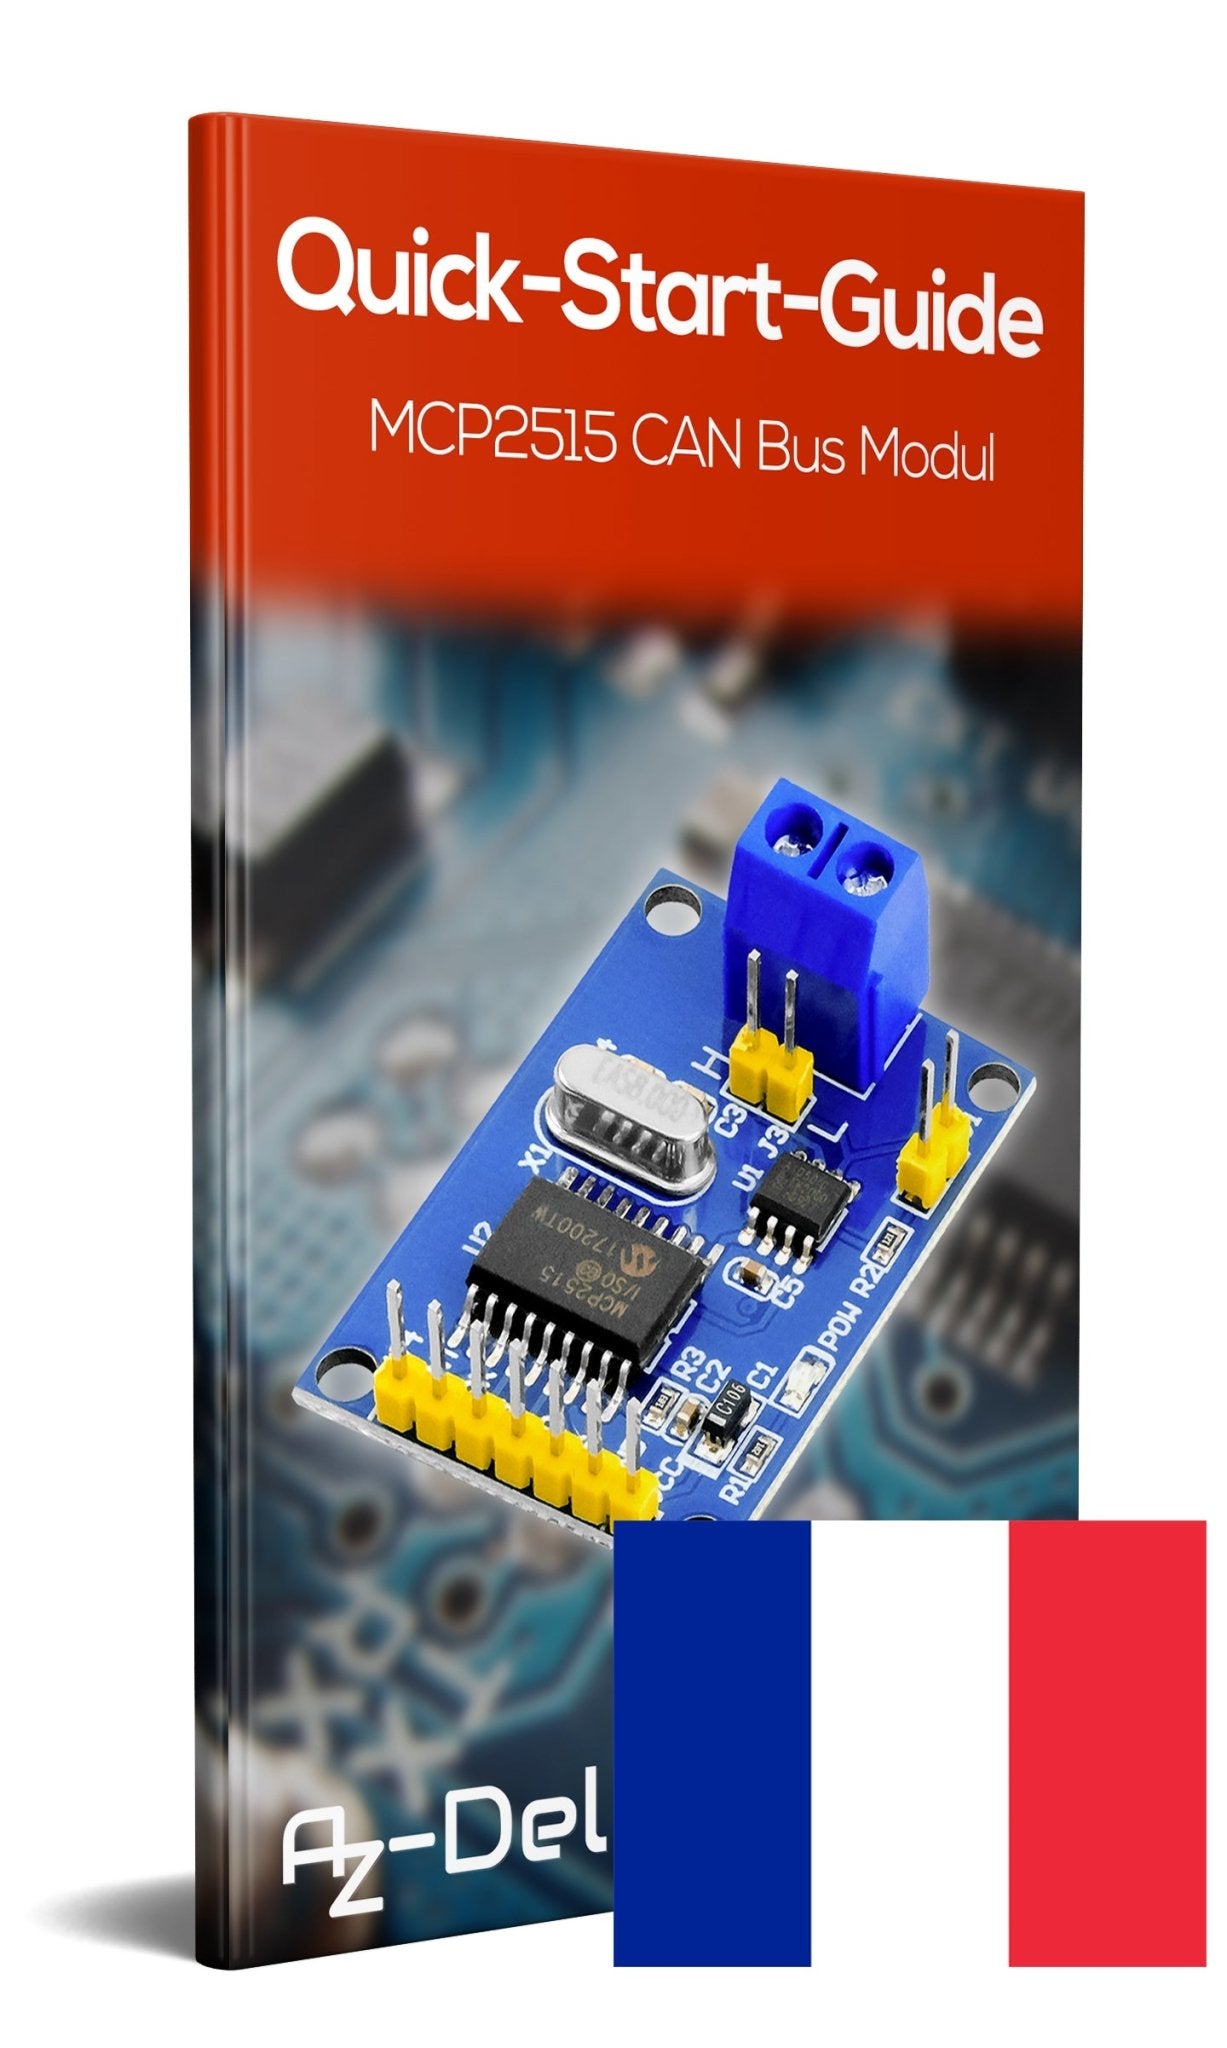 MCP2515 CAN Bus Modul - AZ-Delivery